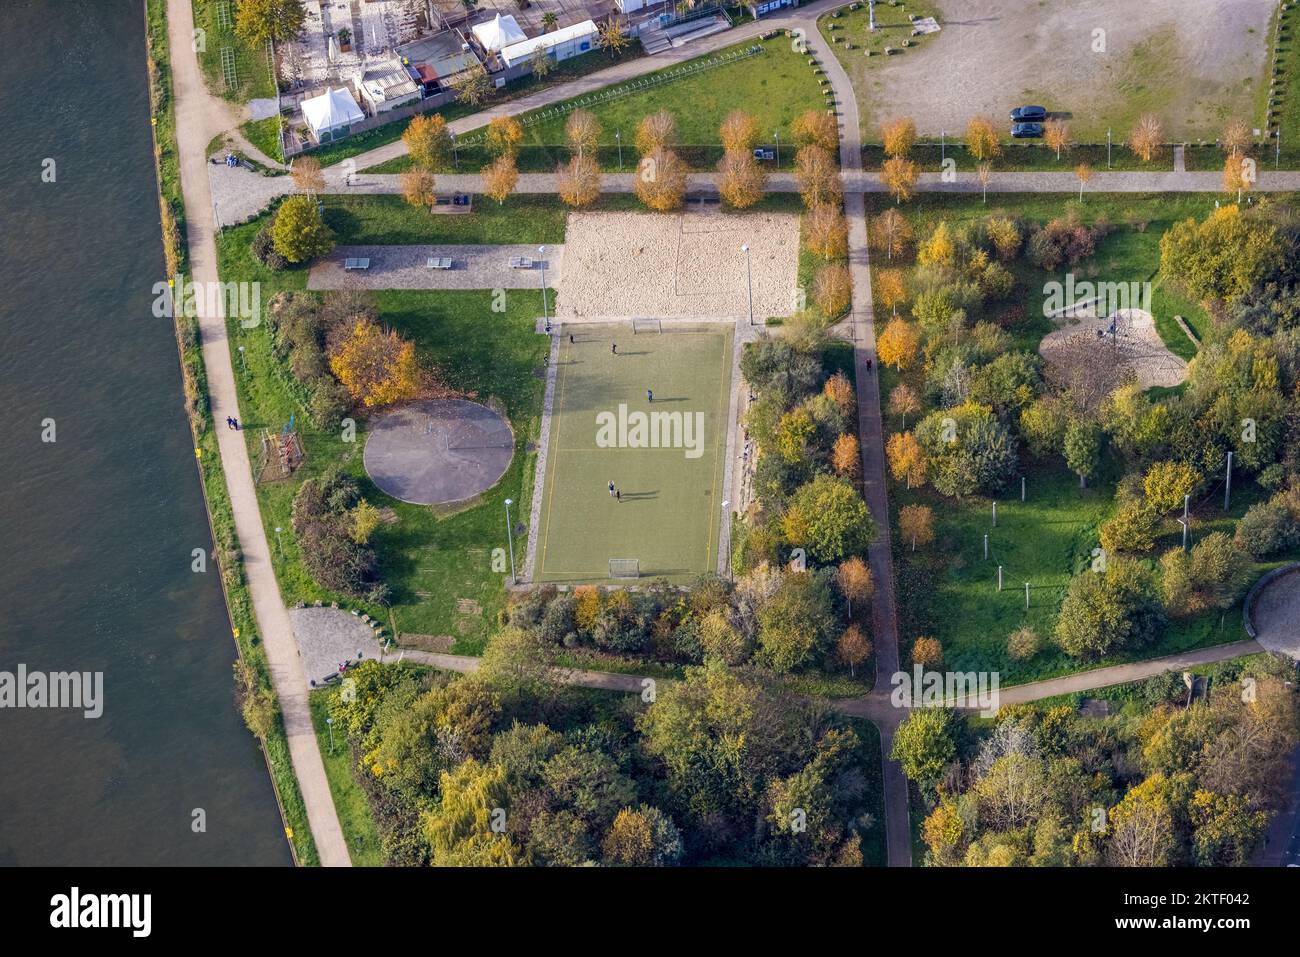 Aerial view, outdoor playground Am Kanal, Unser Fritz, Herne, Ruhr area, North Rhine-Westphalia, Germany, DE, Europe, Soccer field, Aerial photography Stock Photo